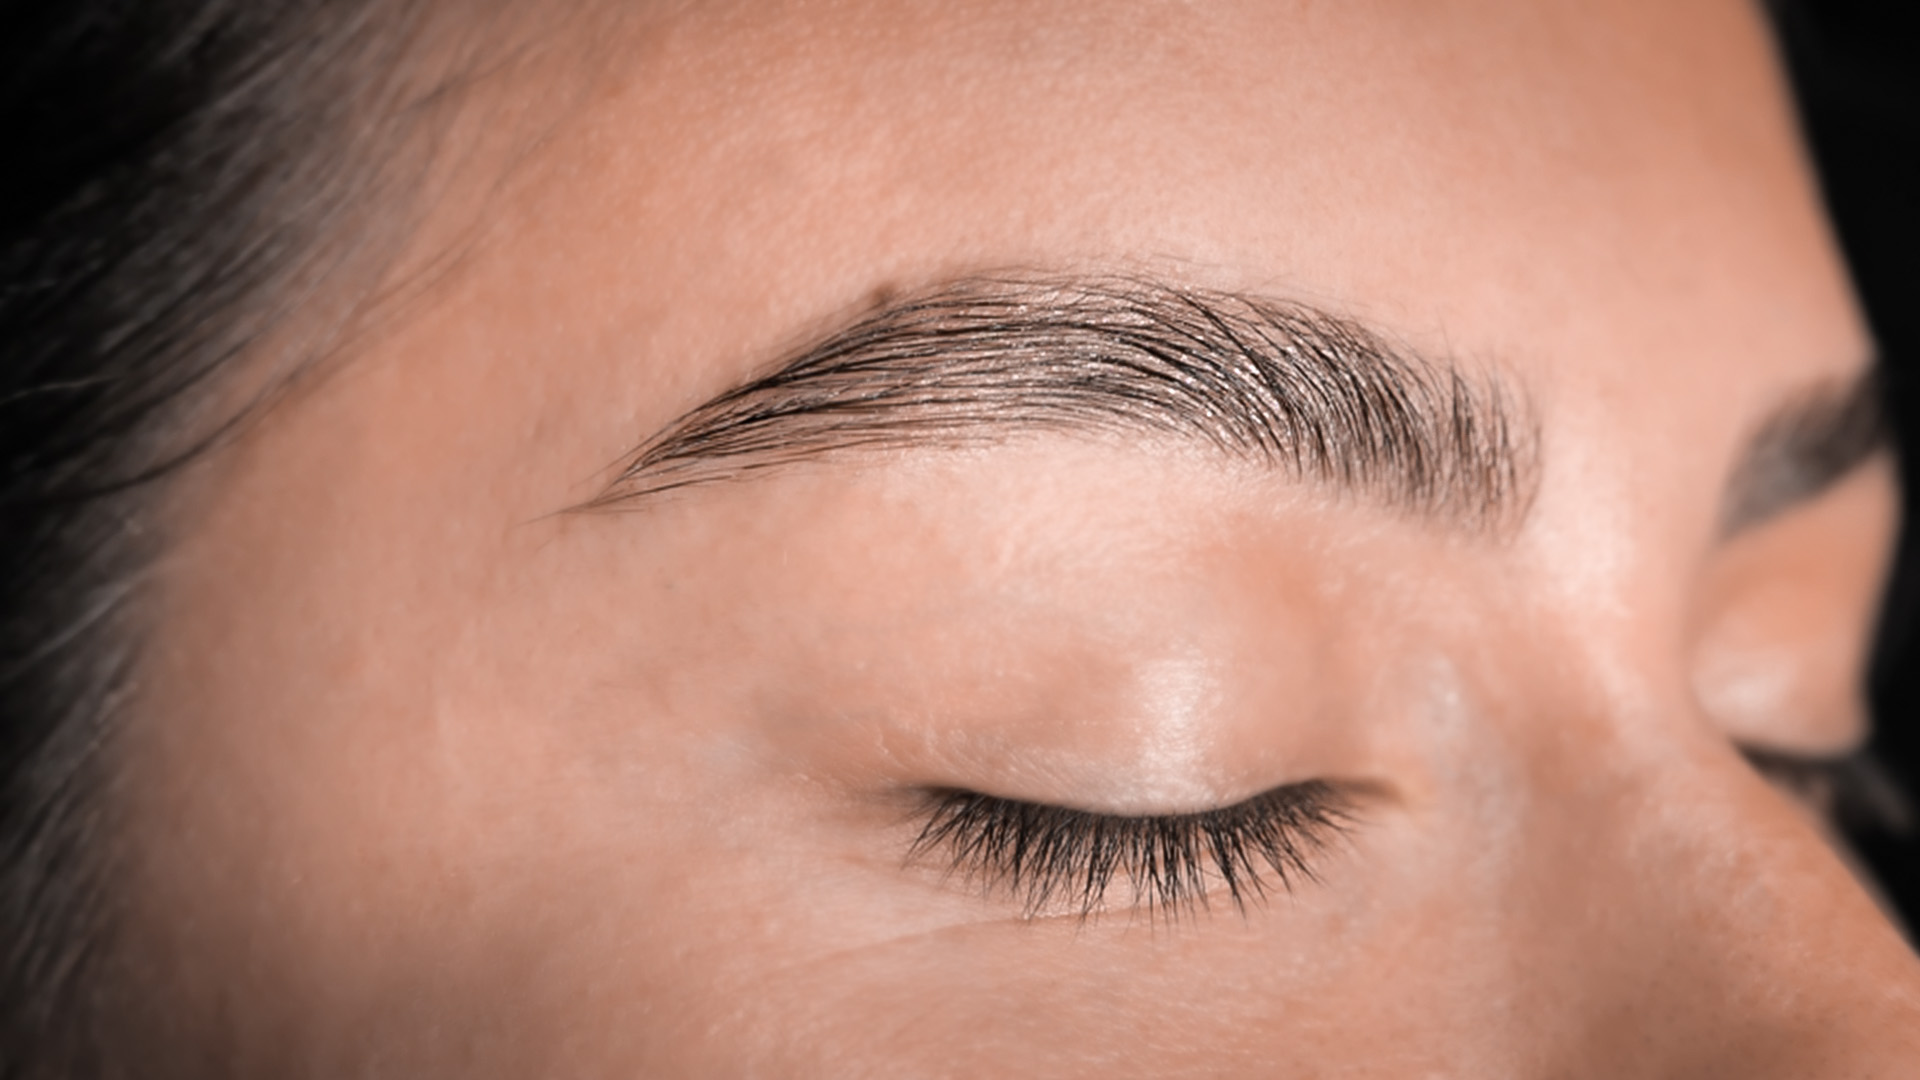 An Image of a Brow Lamination at On Fleek Studio in Santa Rosa,CA for their blog. Your Brow Transformation Journey: From Waxing to Lamination.